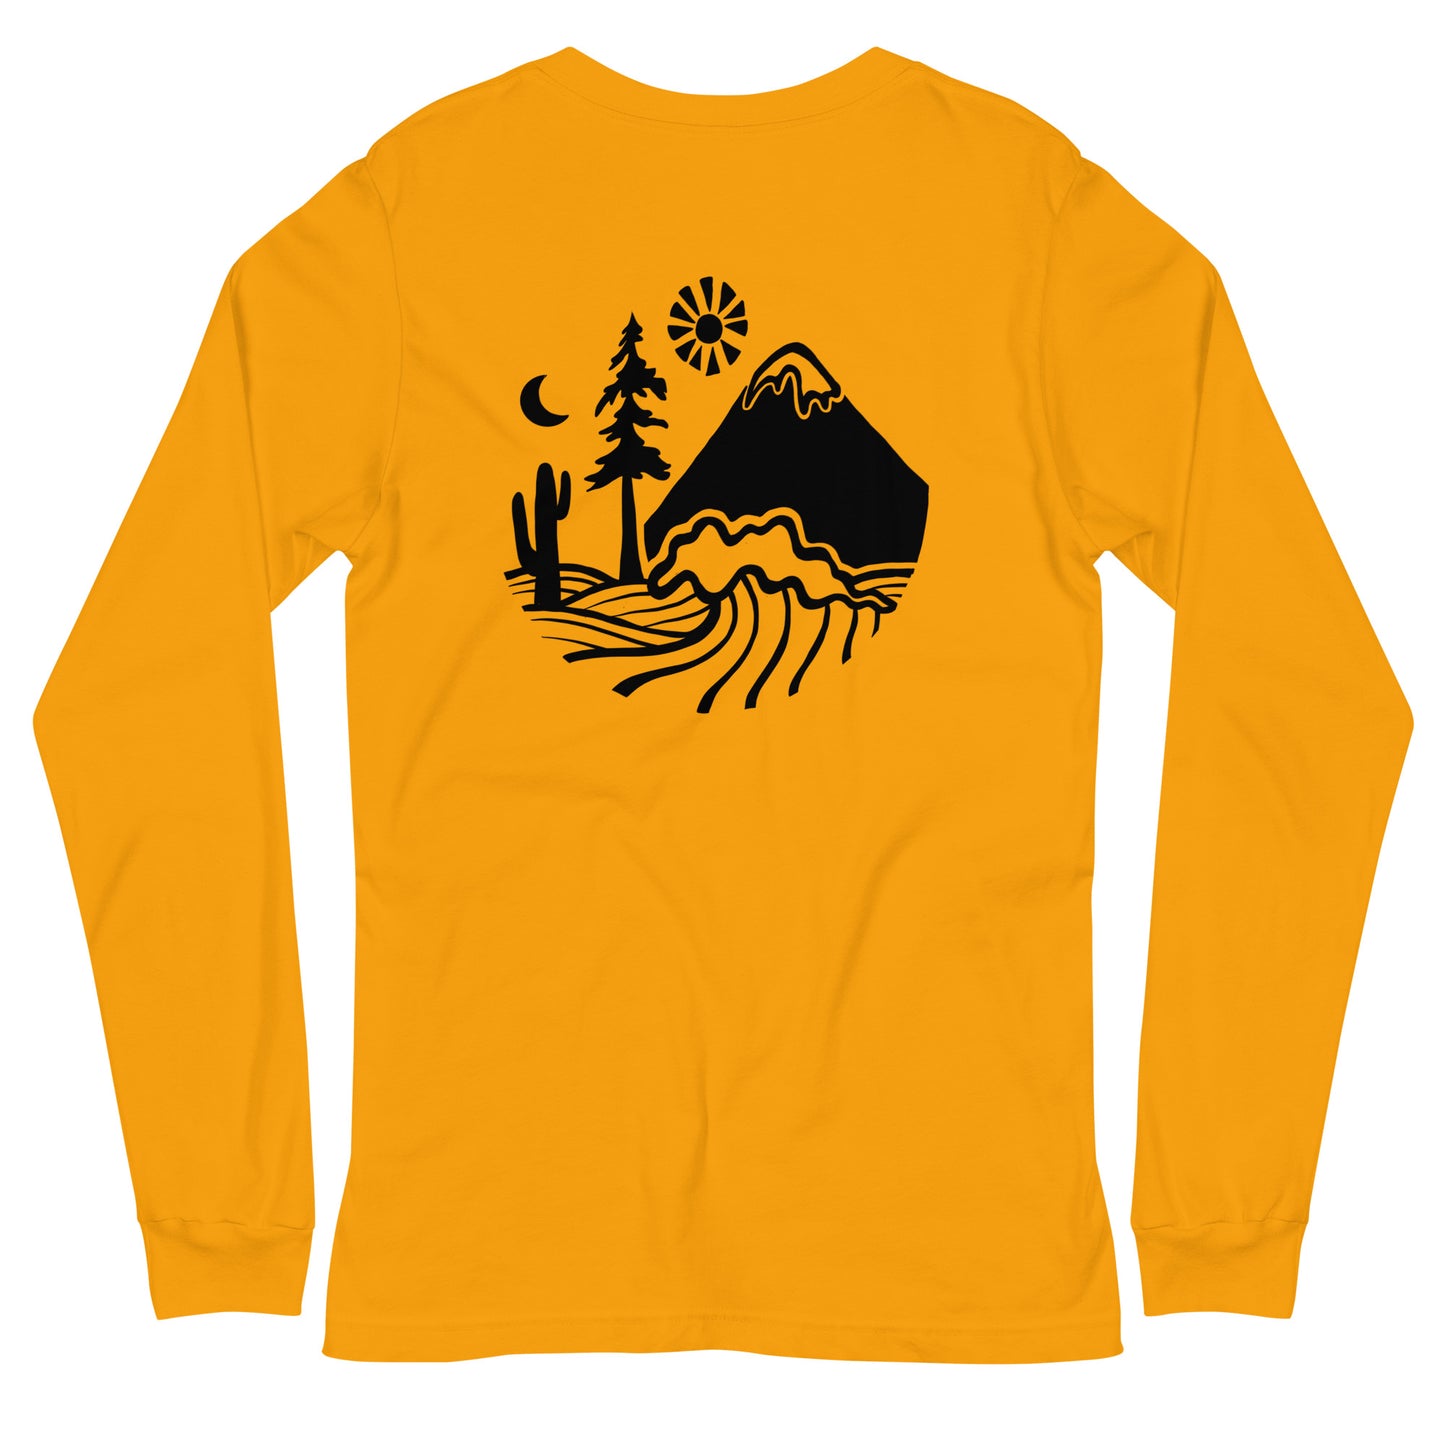 unearthed logo long sleeve tee